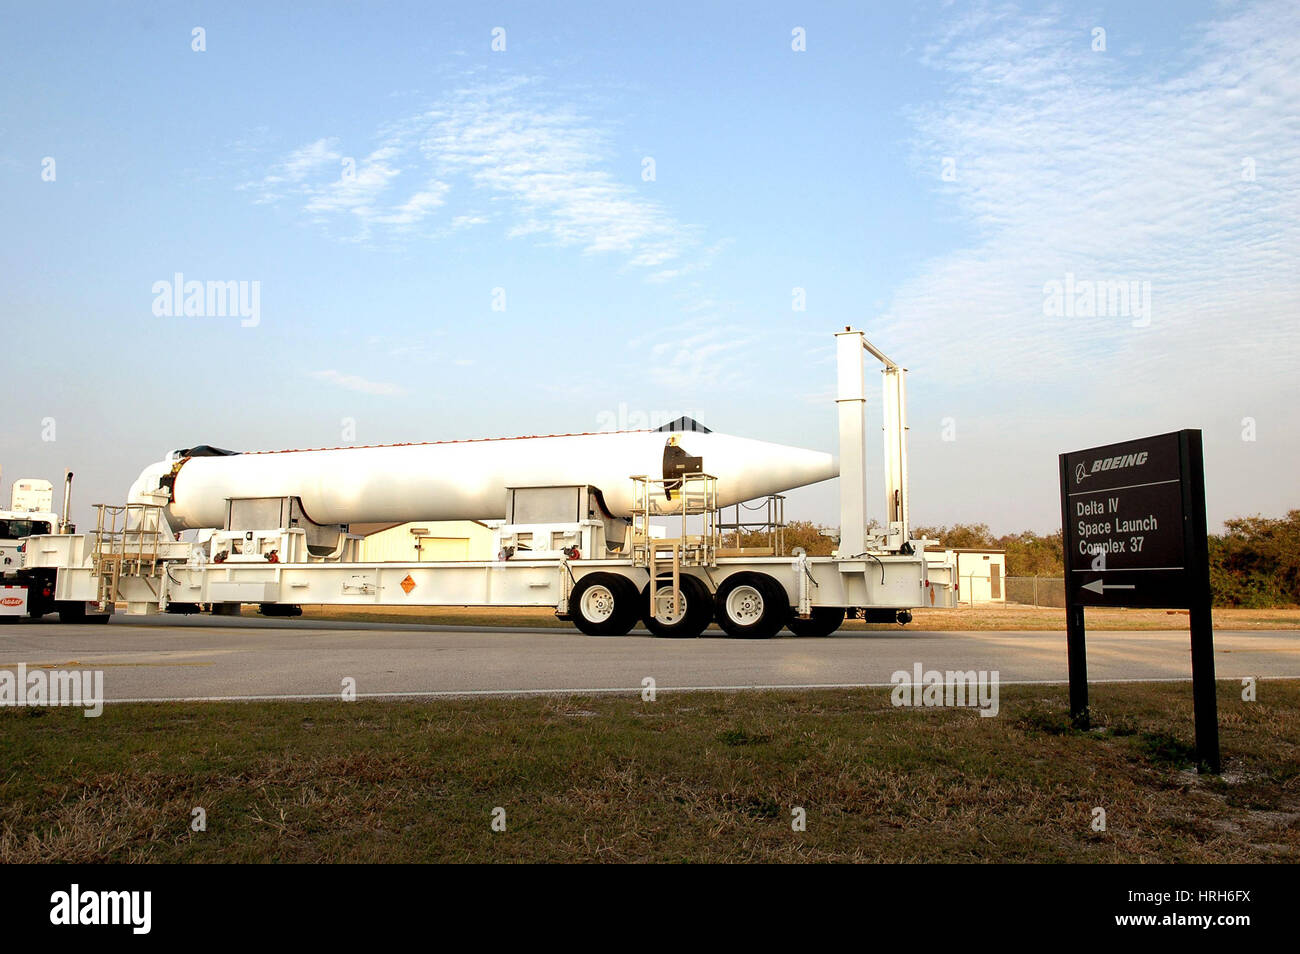 Solid Rocket Booster Stock Photo